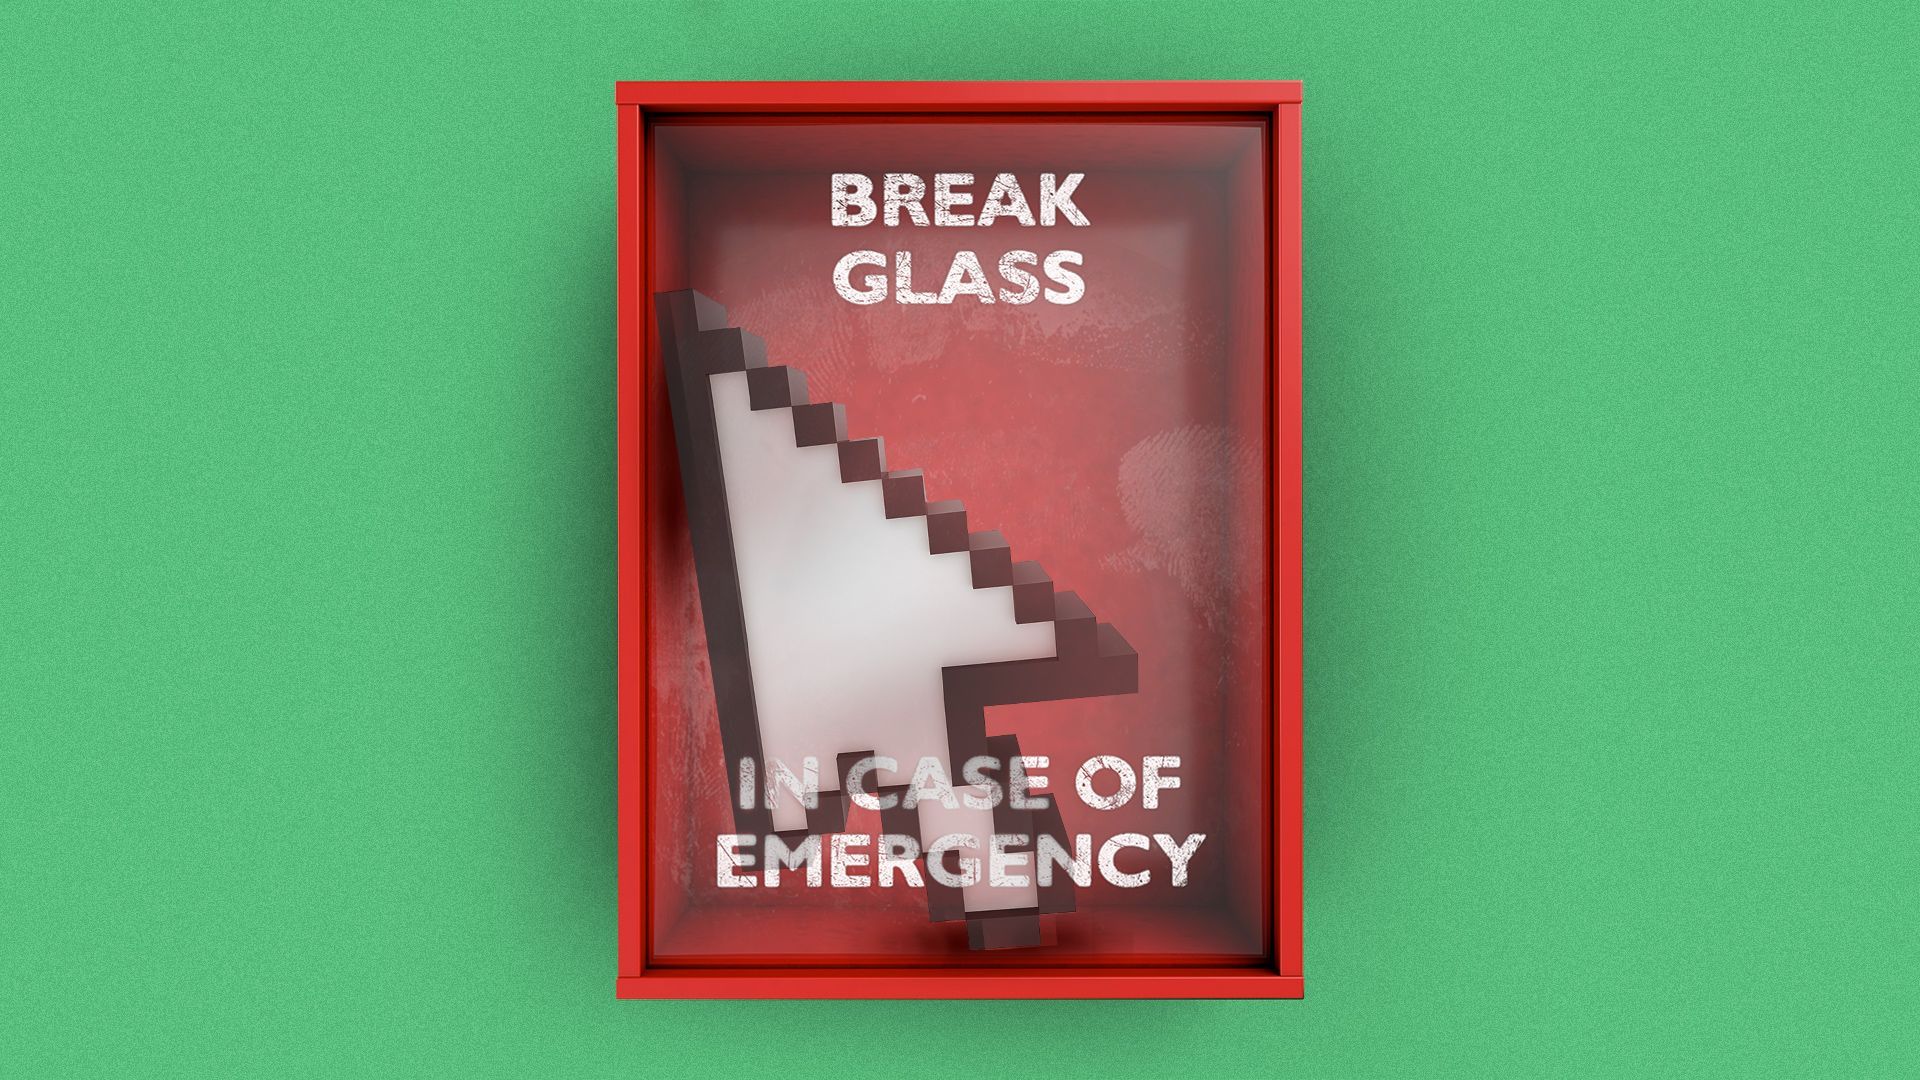 Illustration of a computer cursor in an emergency box that reads, "Break glass in case of emergency."